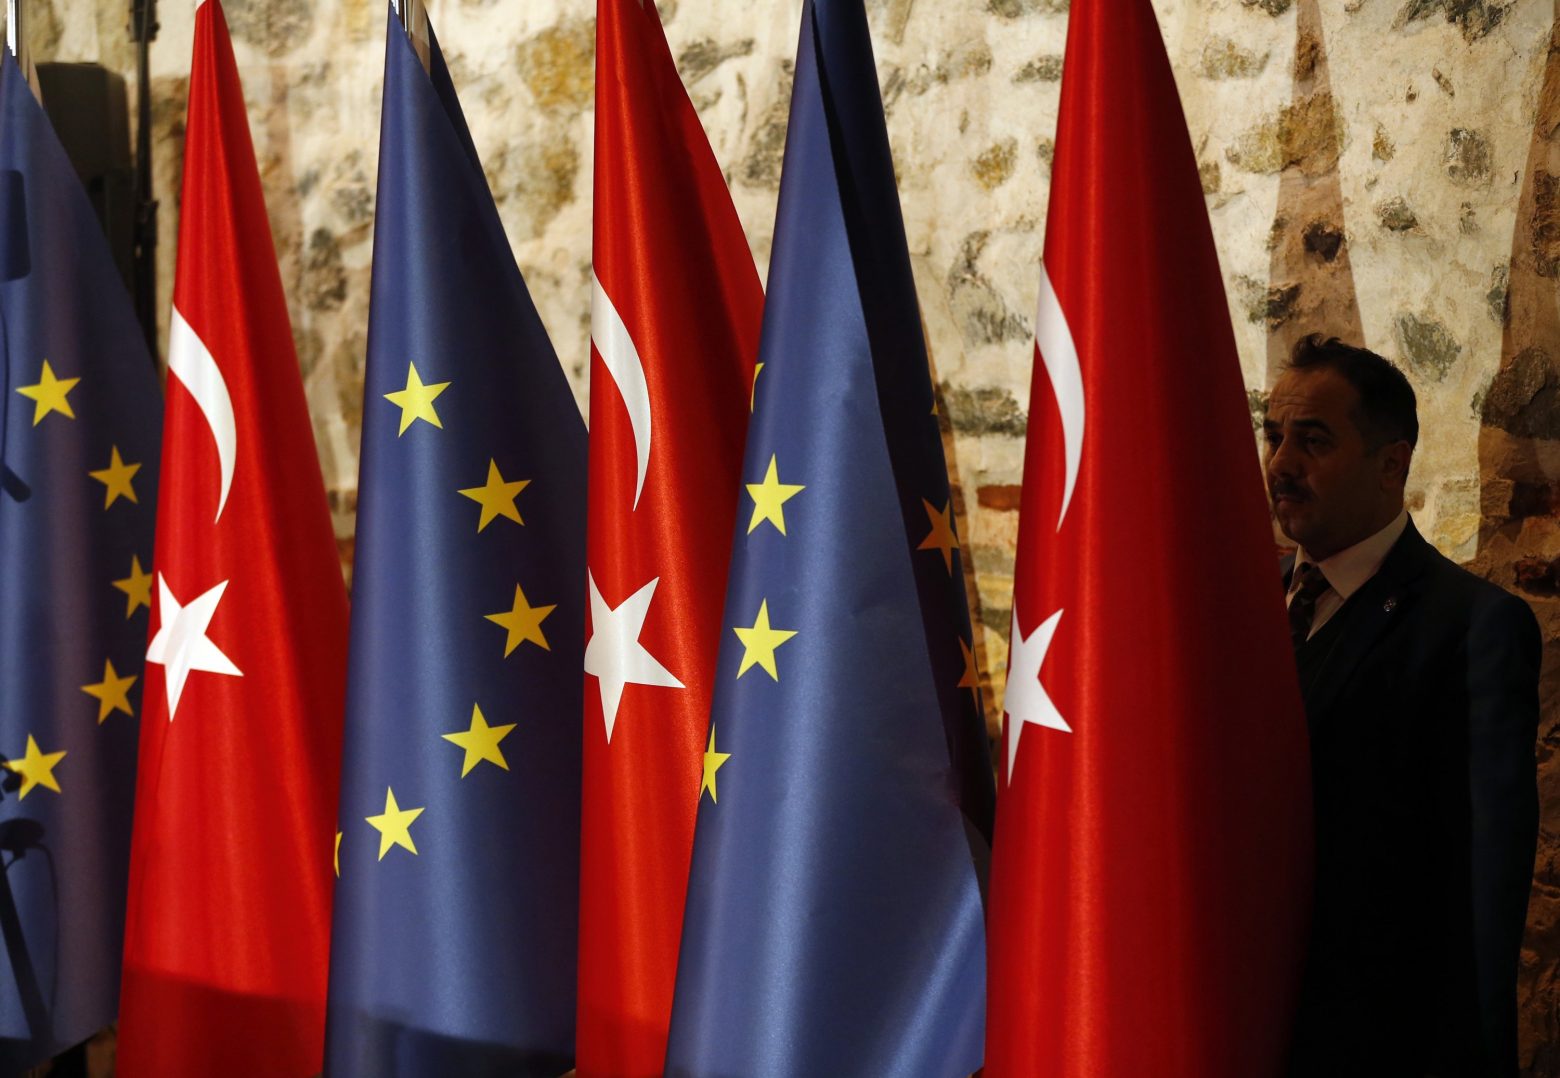 Will we see a 'different' Turkey at the EU summit?